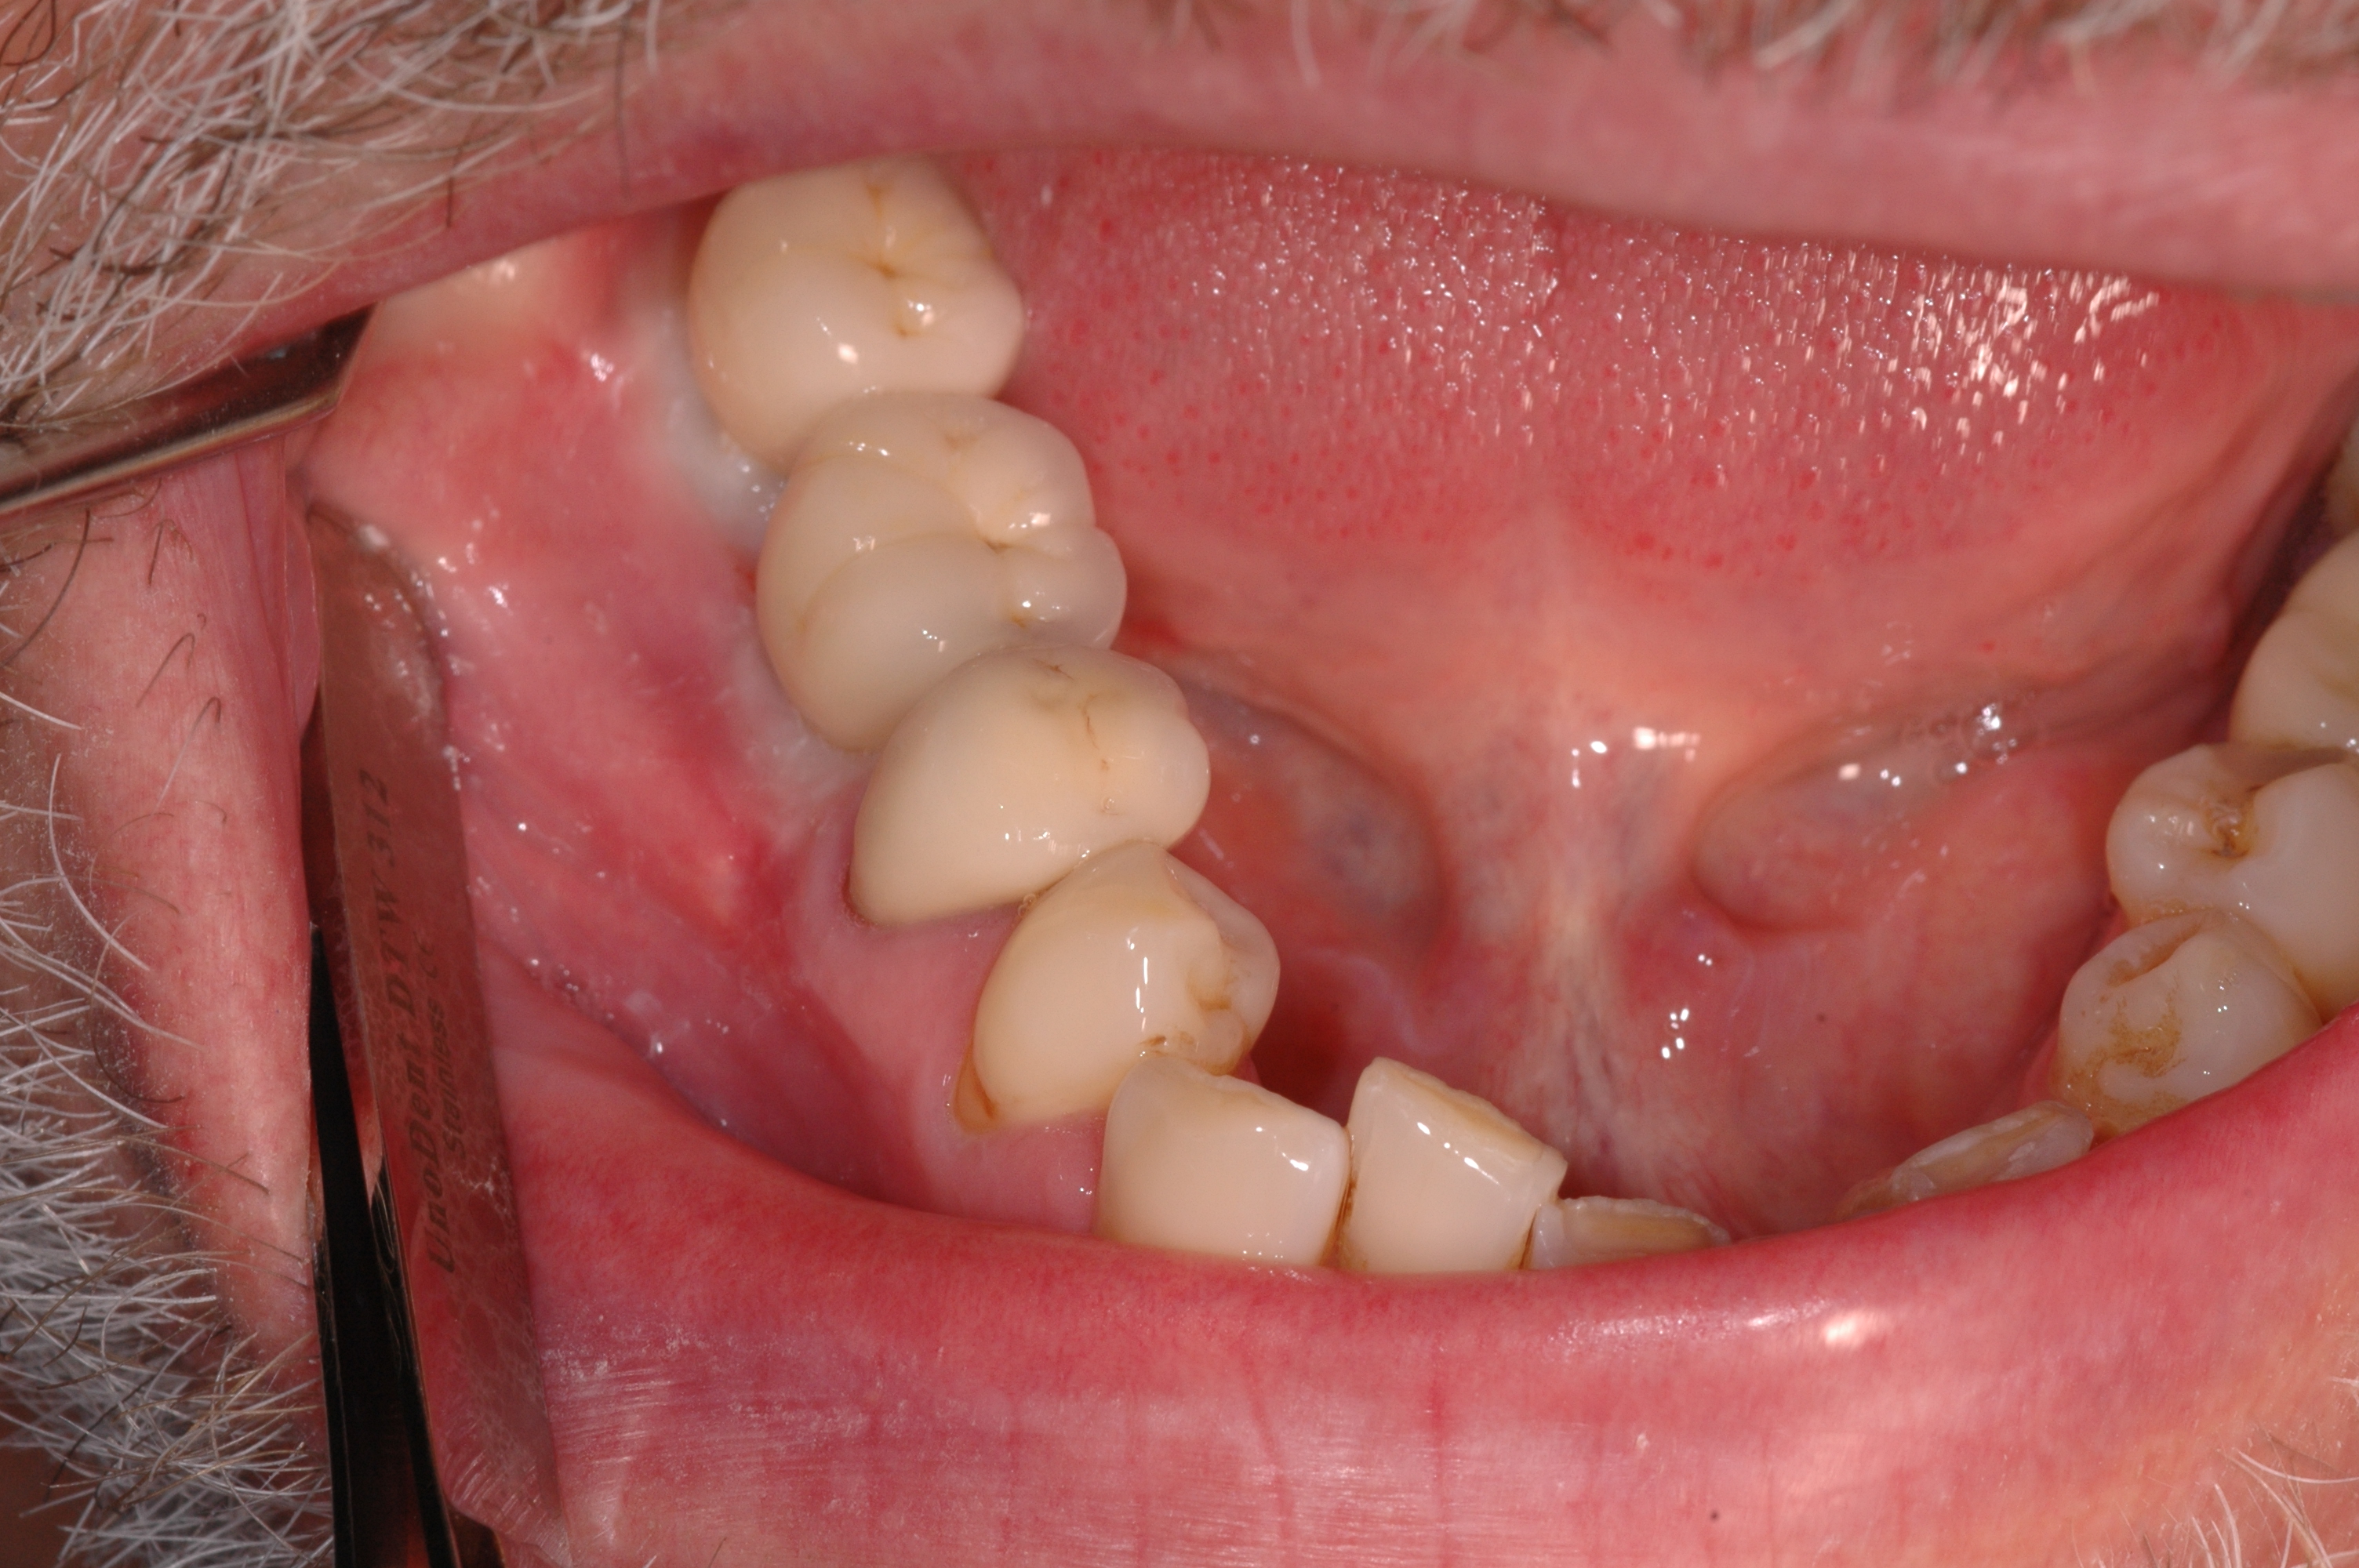 Cement retained crowns in the mouth